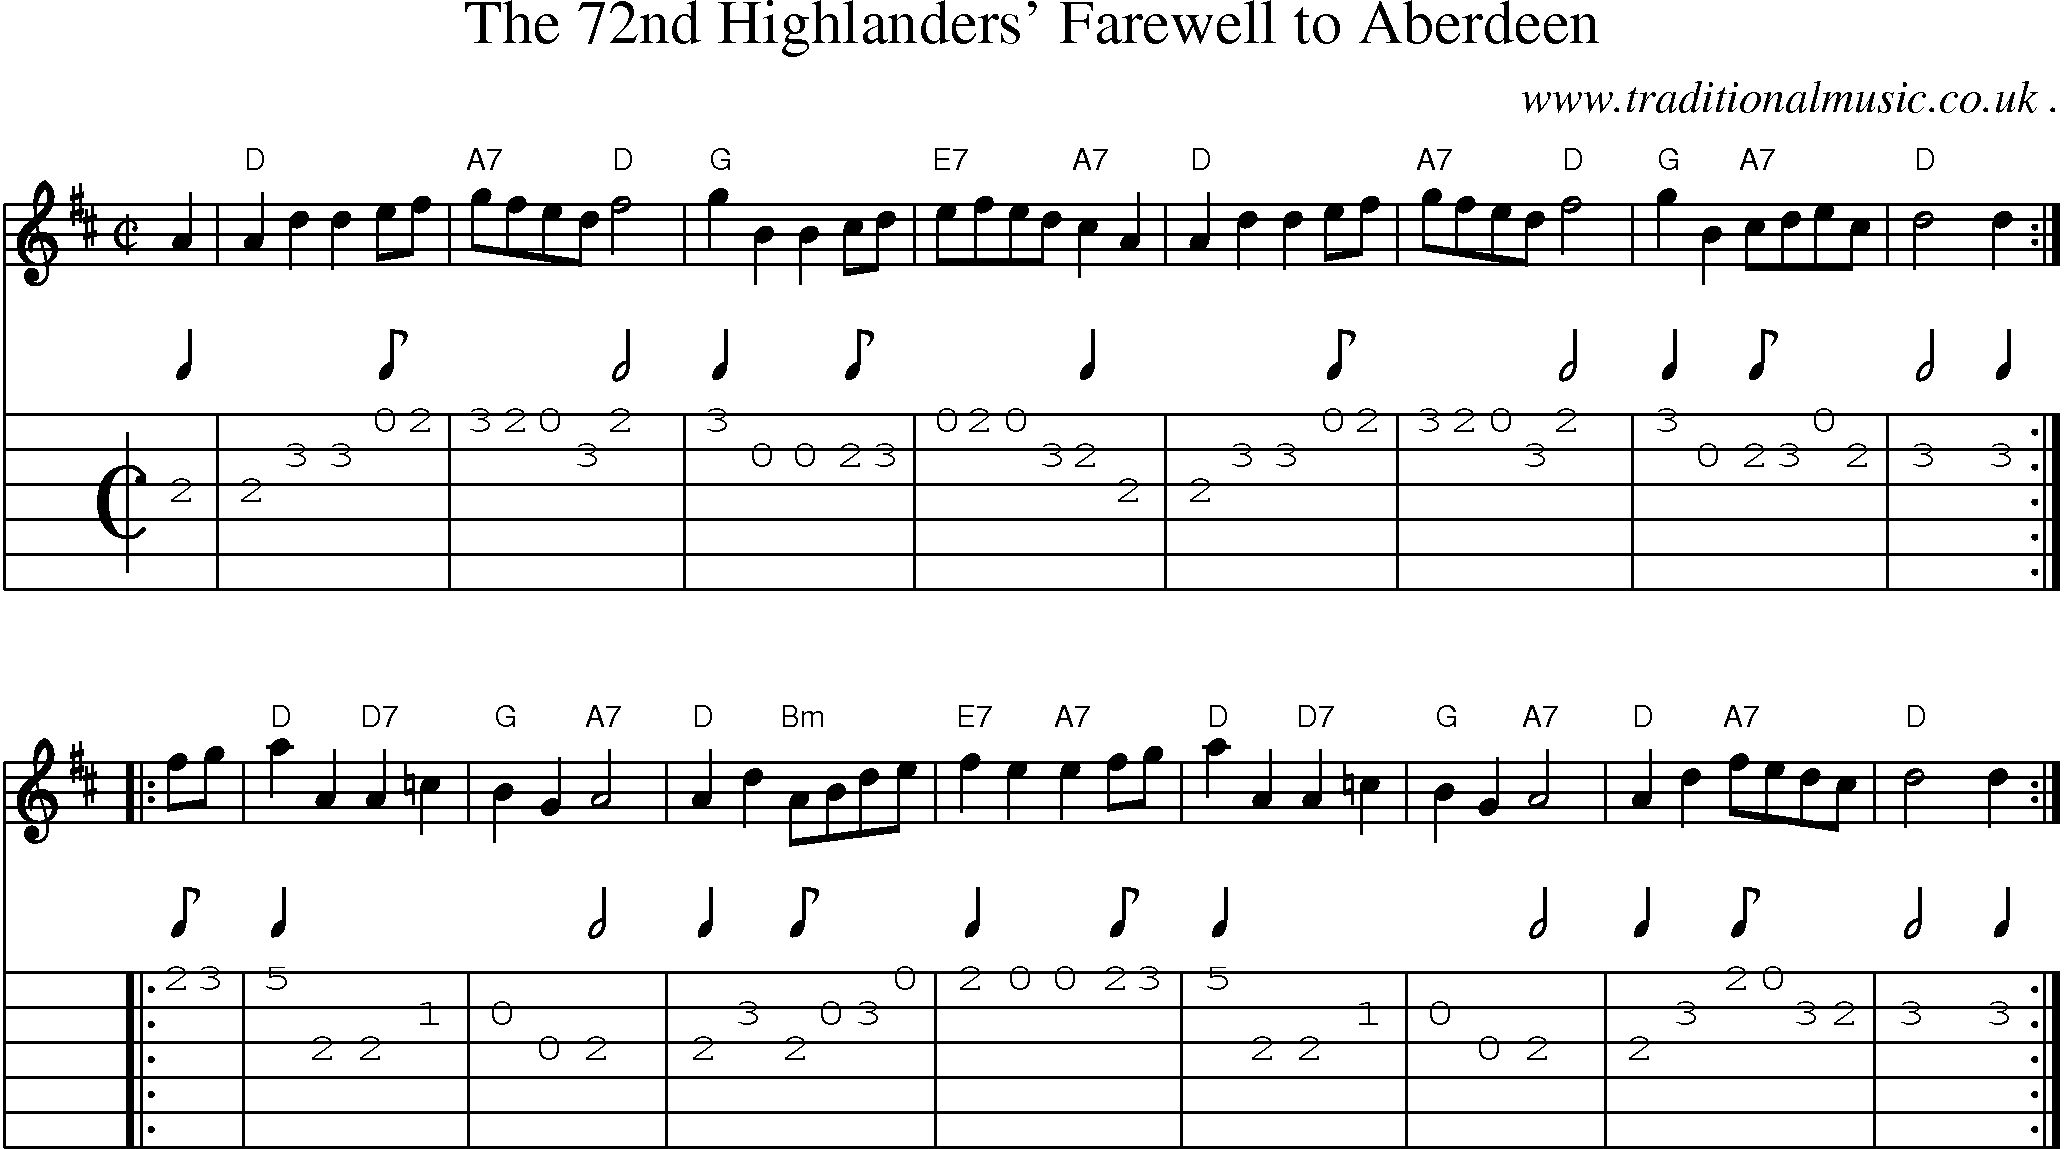 Sheet-music  score, Chords and Guitar Tabs for The 72nd Highlanders Farewell To Aberdeen